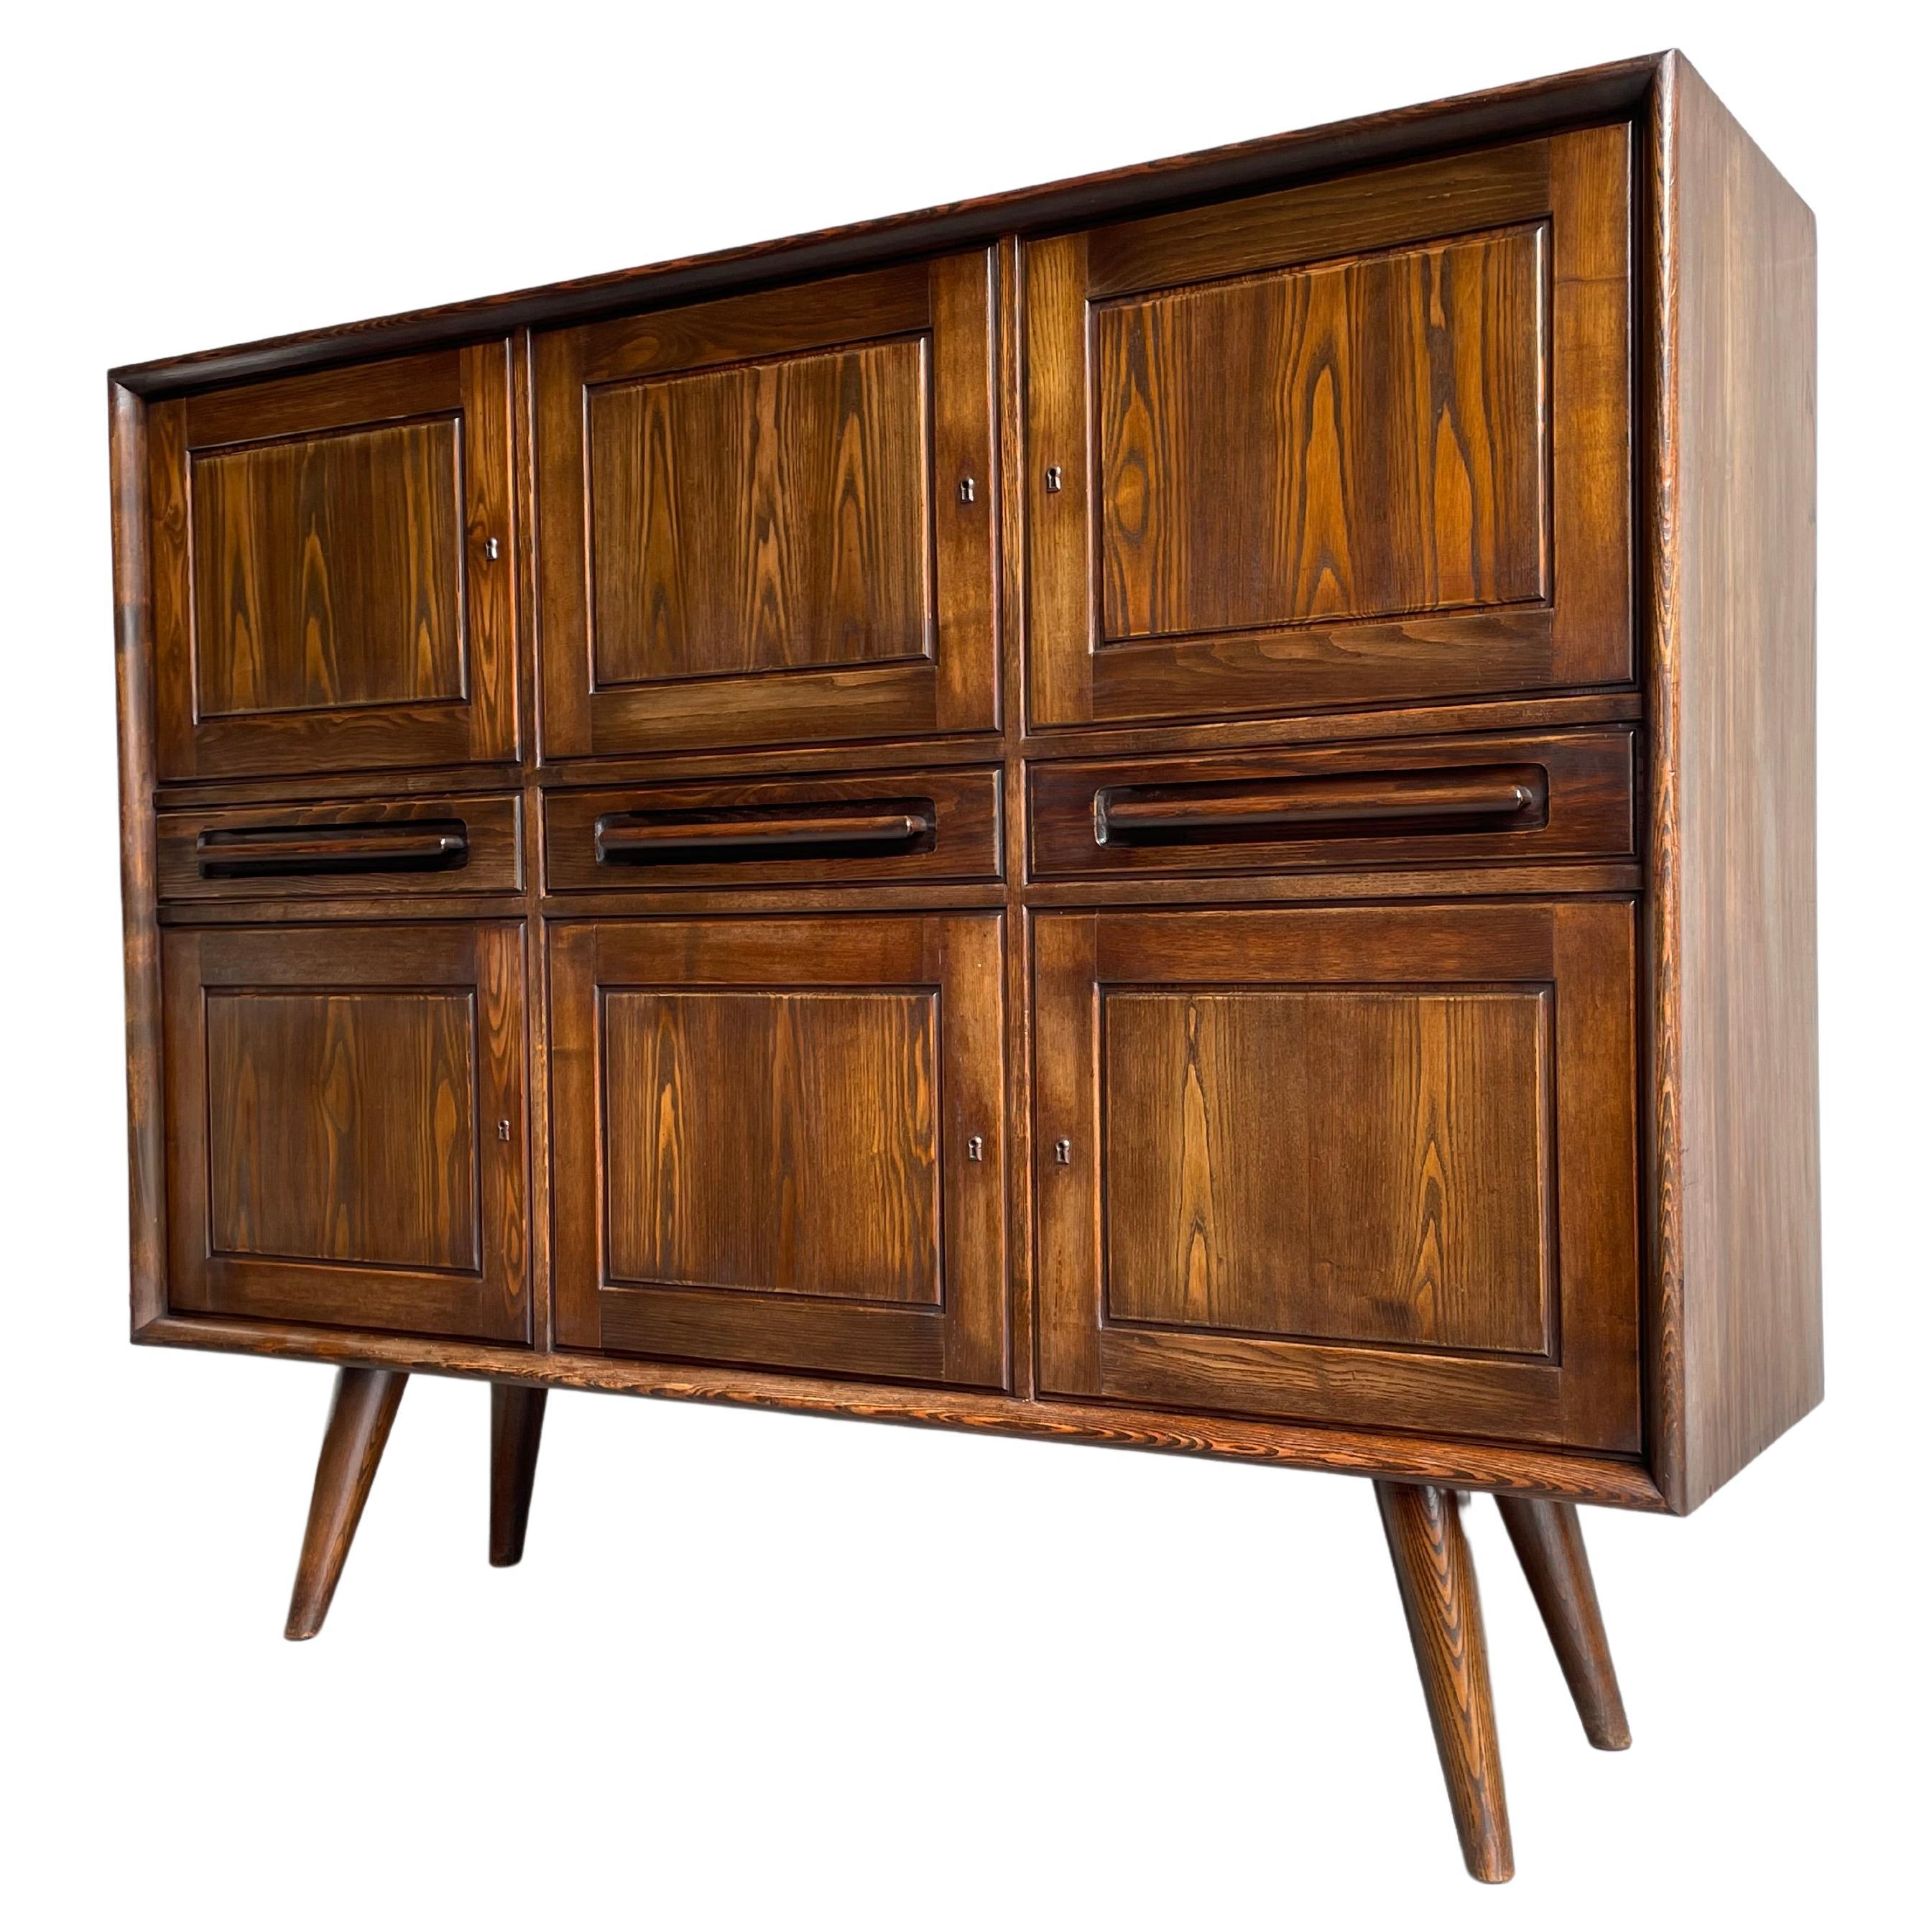 Very Rare Mid-Century Modern Sideboard / Credenza by 't Woonhuys of Amsterdam For Sale